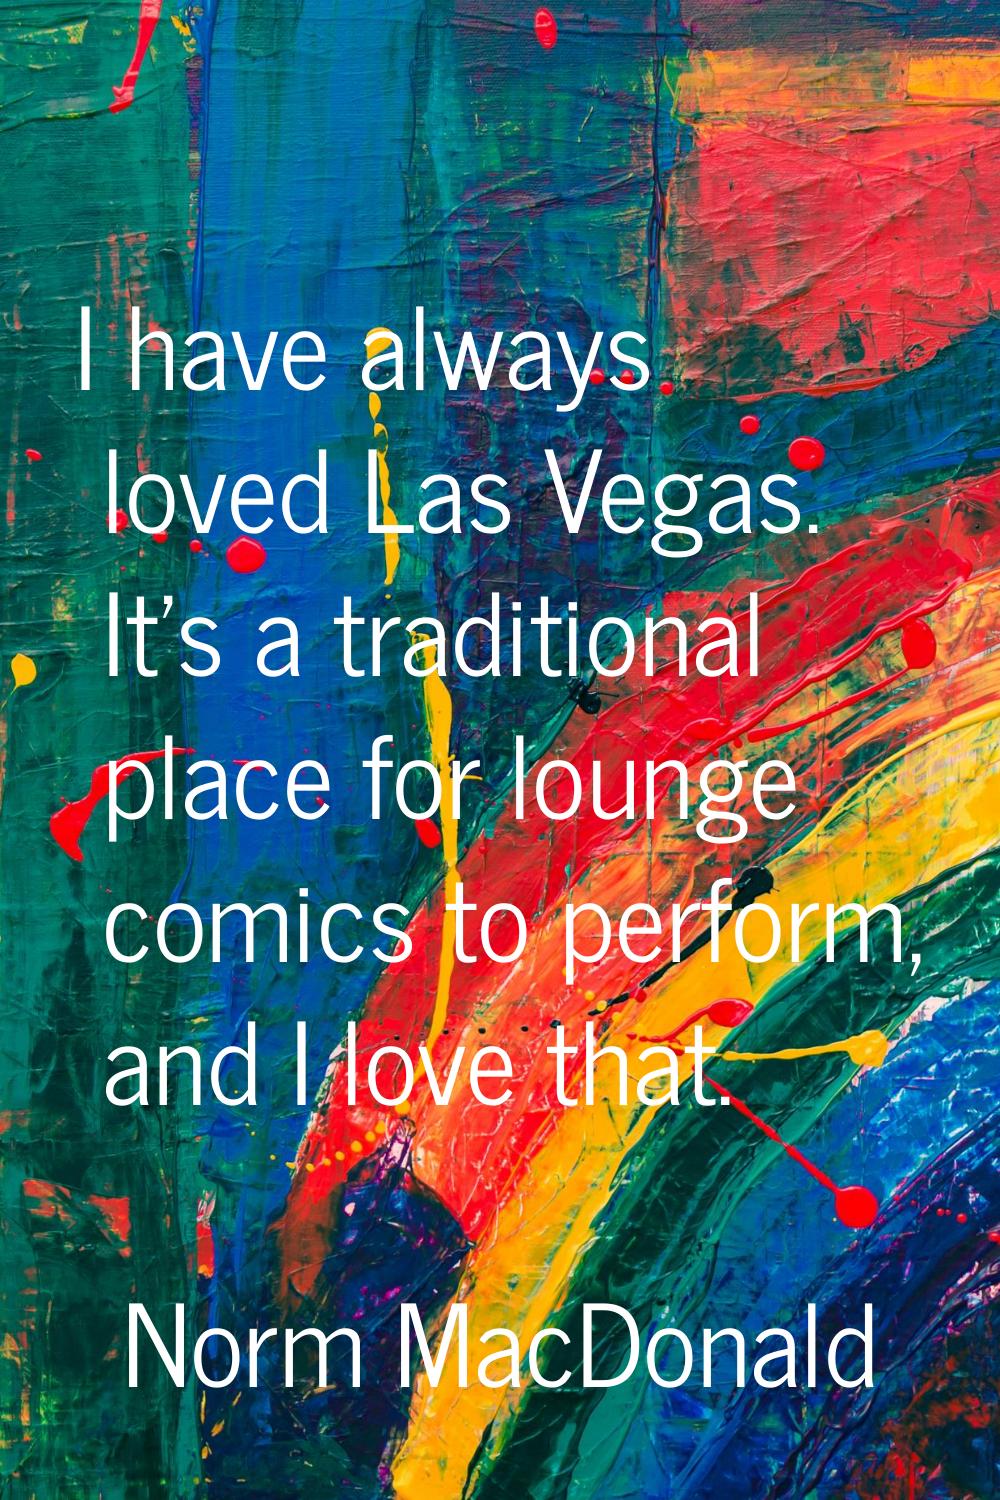 I have always loved Las Vegas. It's a traditional place for lounge comics to perform, and I love th